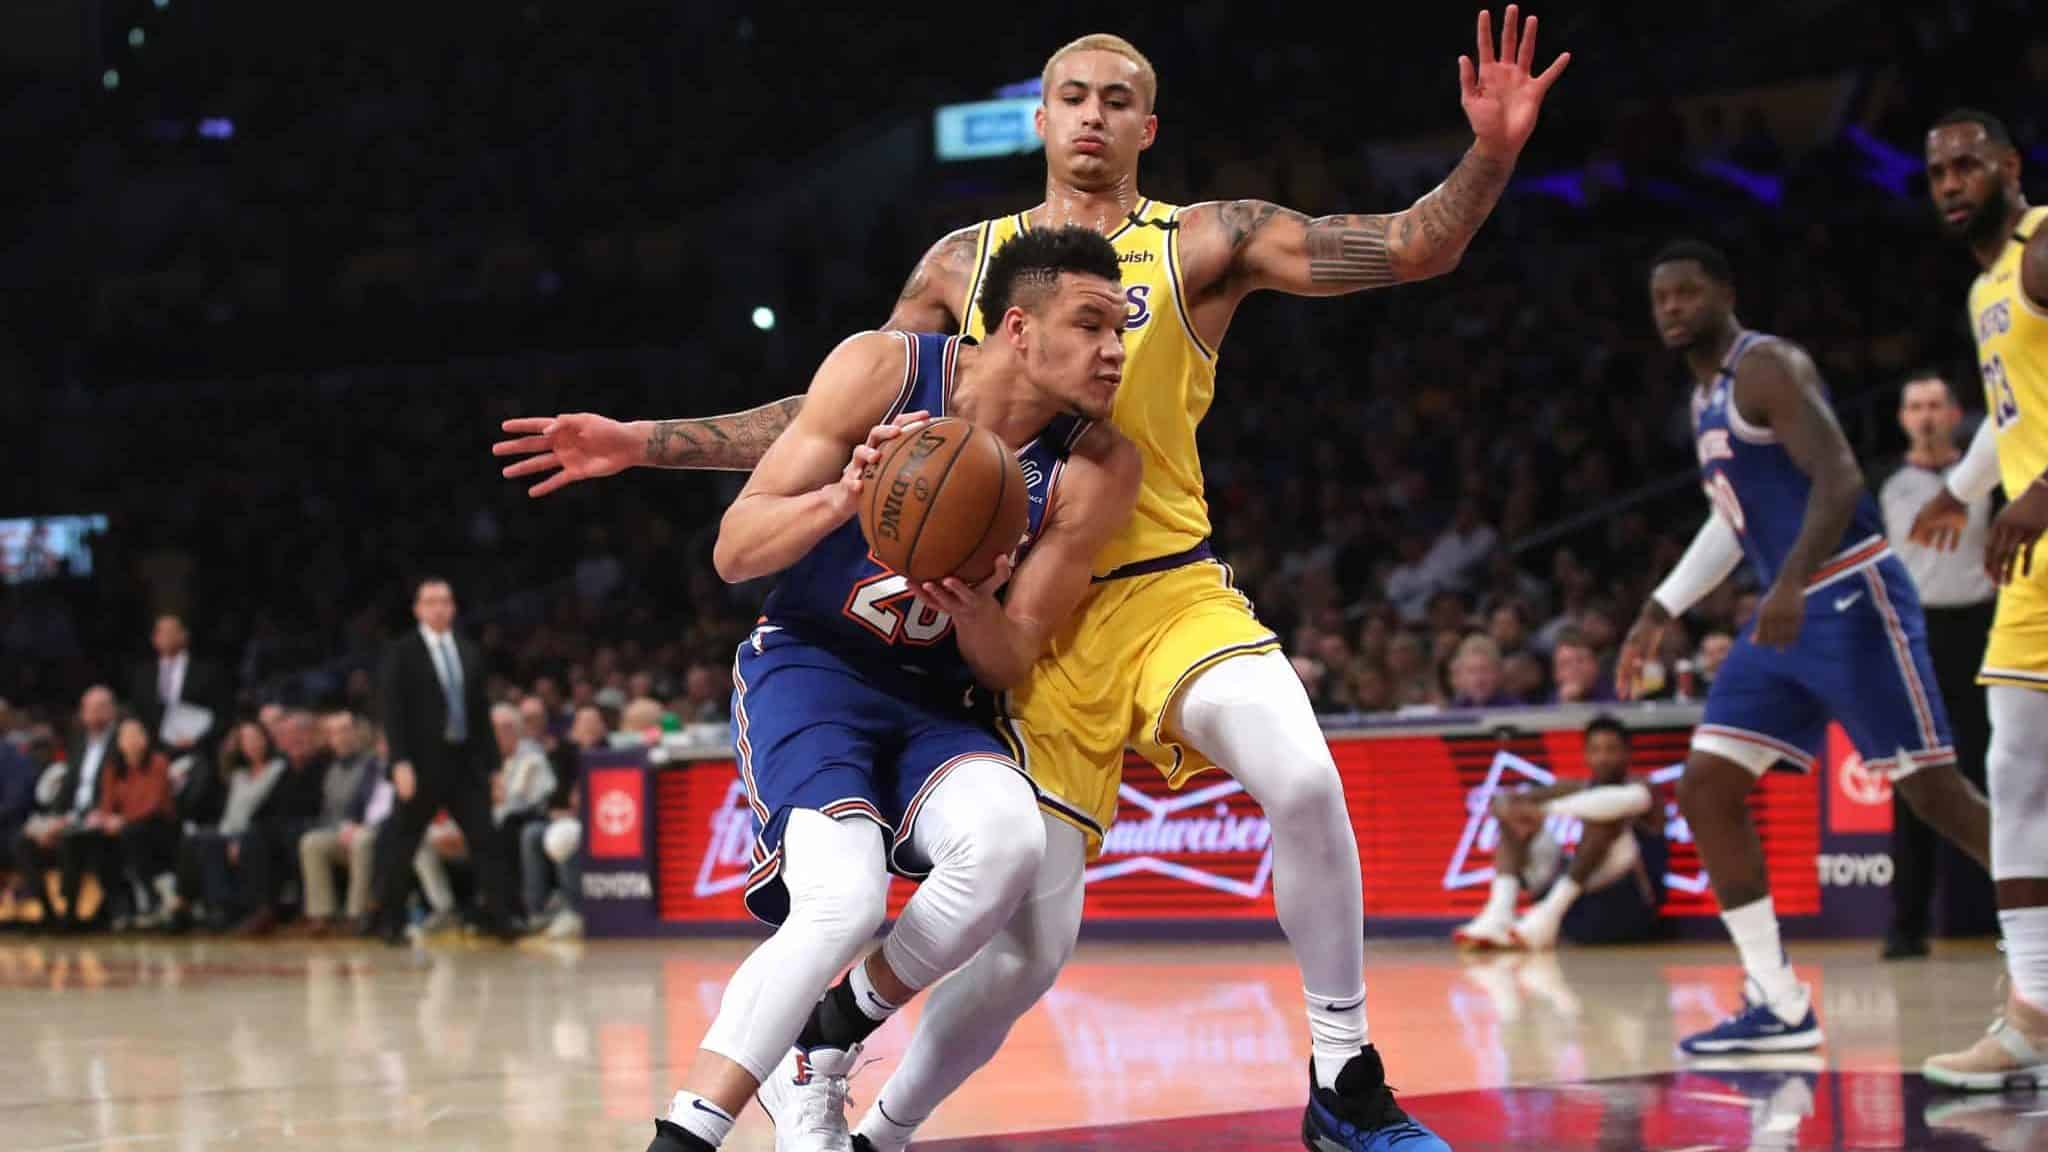 LOS ANGELES, CALIFORNIA - JANUARY 07: Kyle Kuzma #0 of the Los Angeles Lakers defends against Kevin Knox II #20 of the New York Knicks during the first half of a game at Staples Center on January 07, 2020 in Los Angeles, California. NOTE TO USER: User expressly acknowledges and agrees that, by downloading and/or using this photograph, user is consenting to the terms and conditions of the Getty Images License Agreement